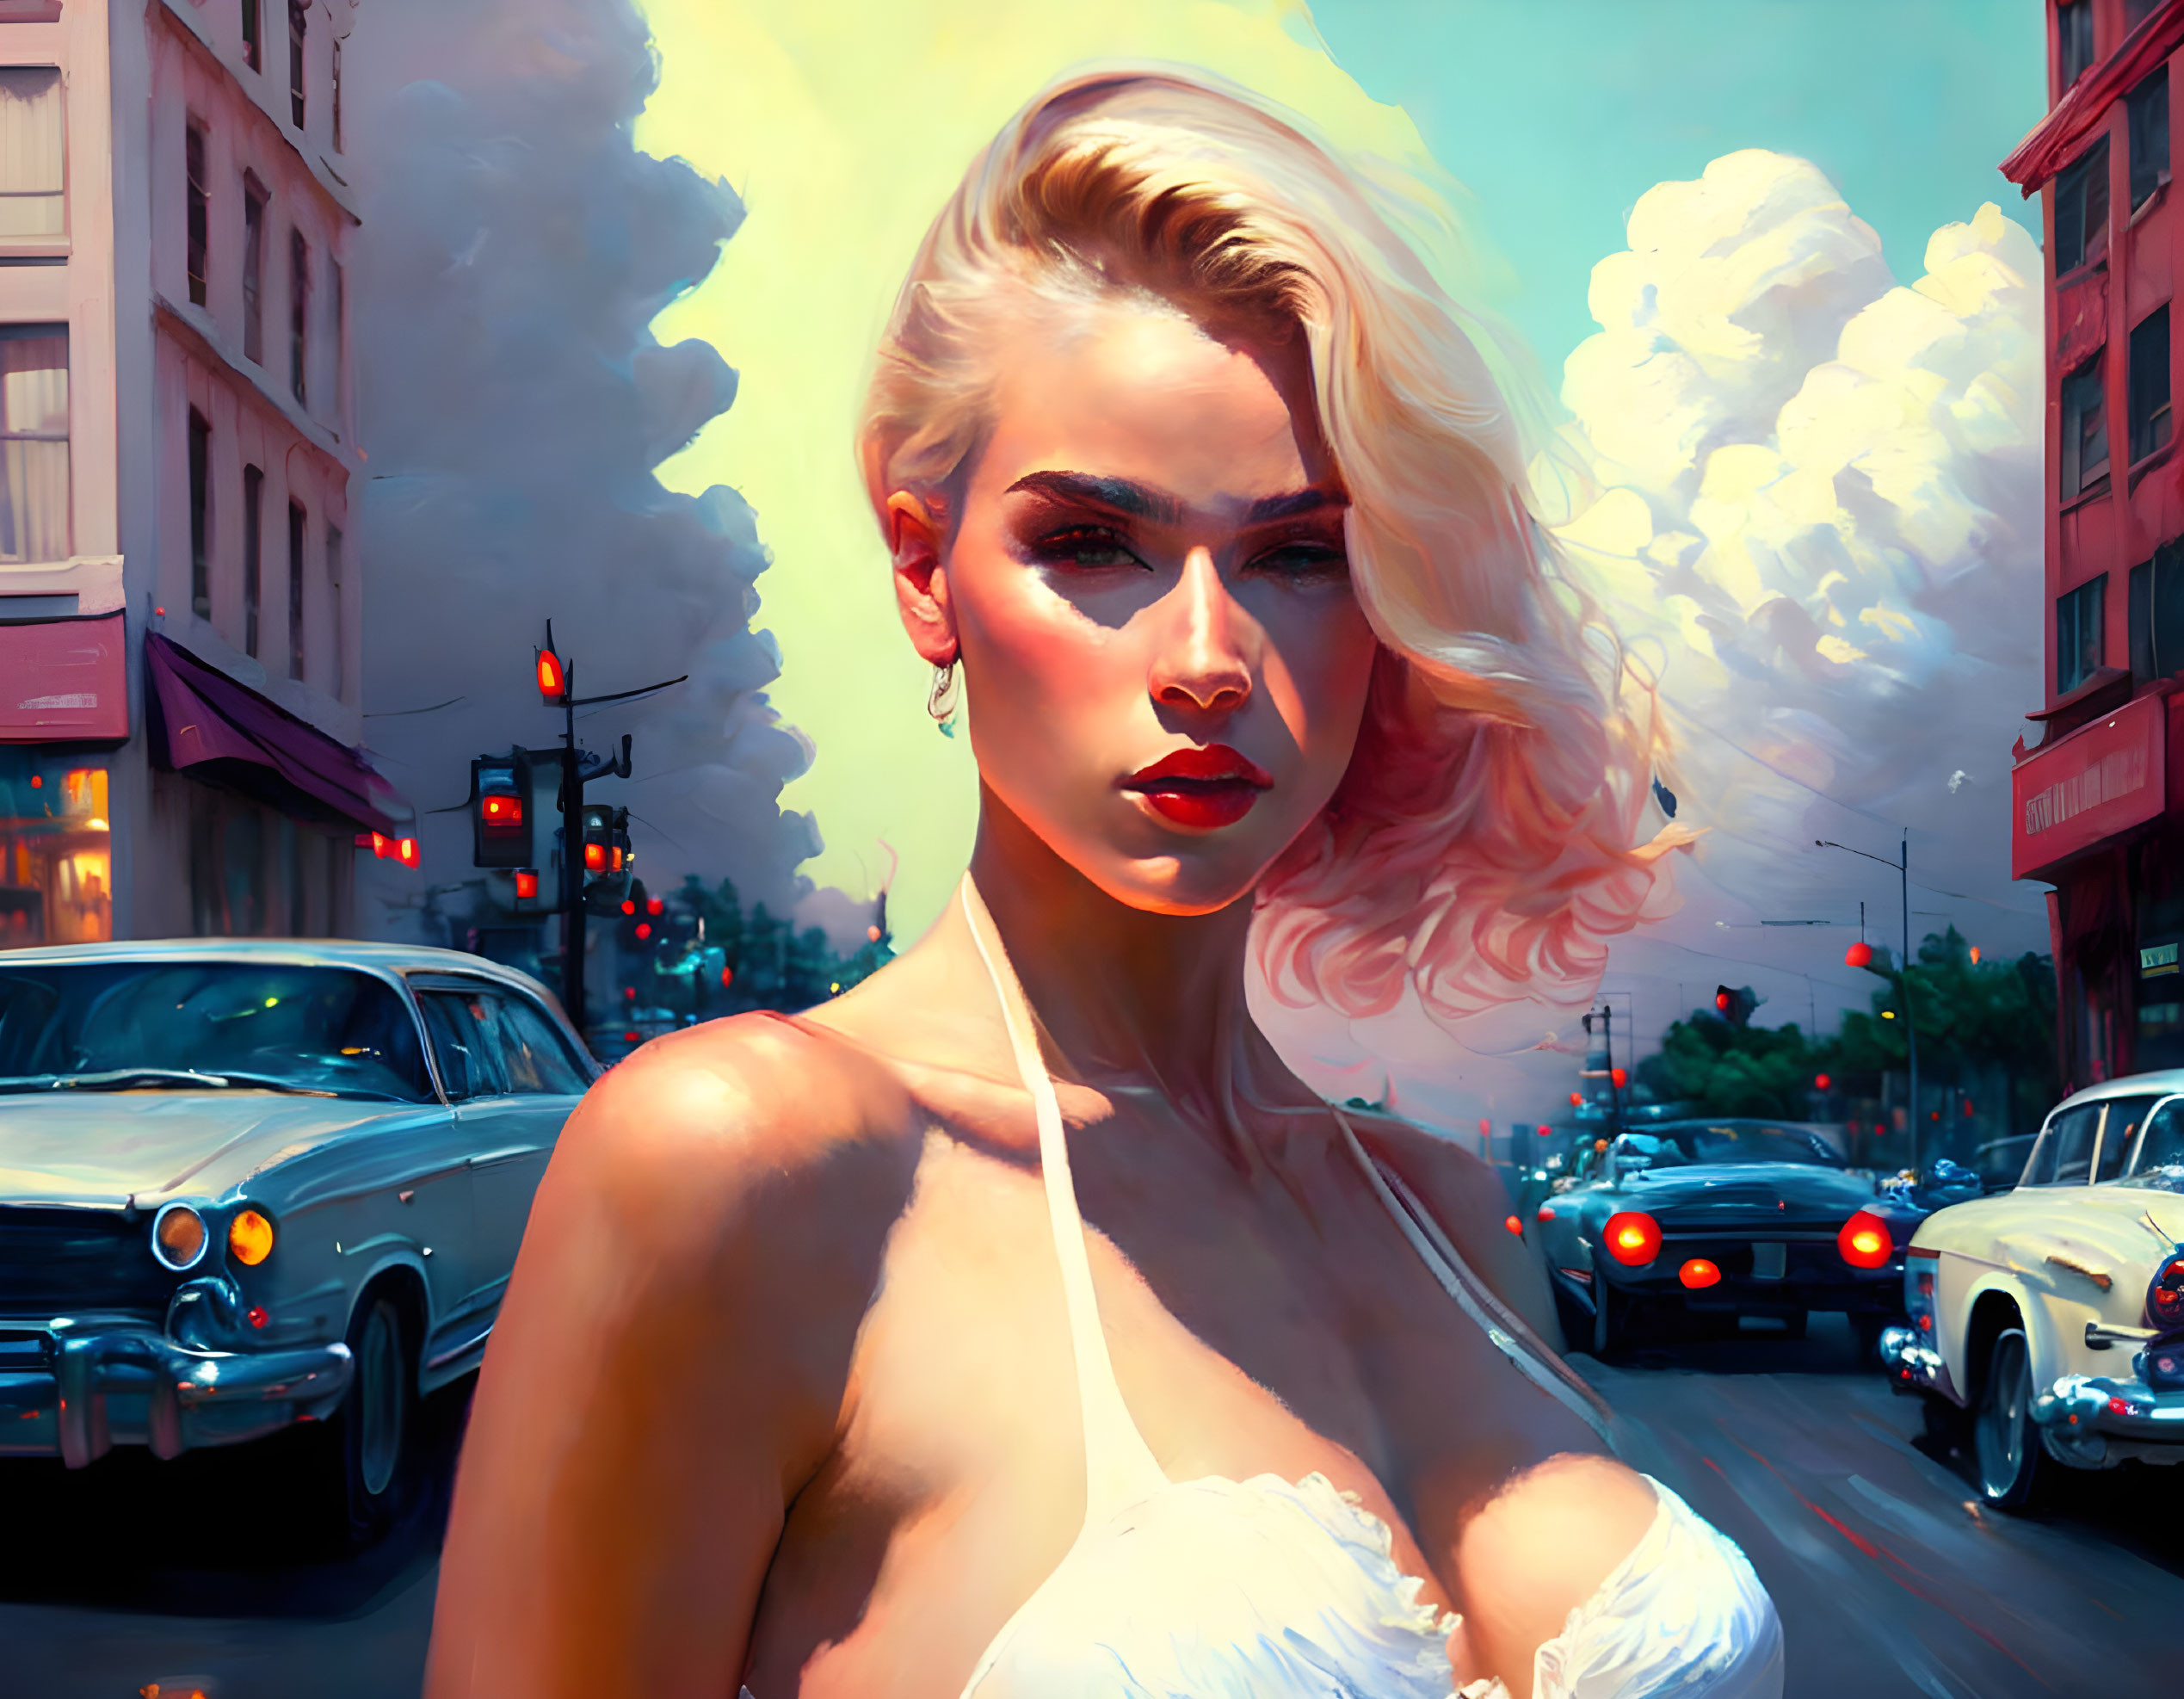 Stylized illustration of glamorous woman with blonde hair in urban setting